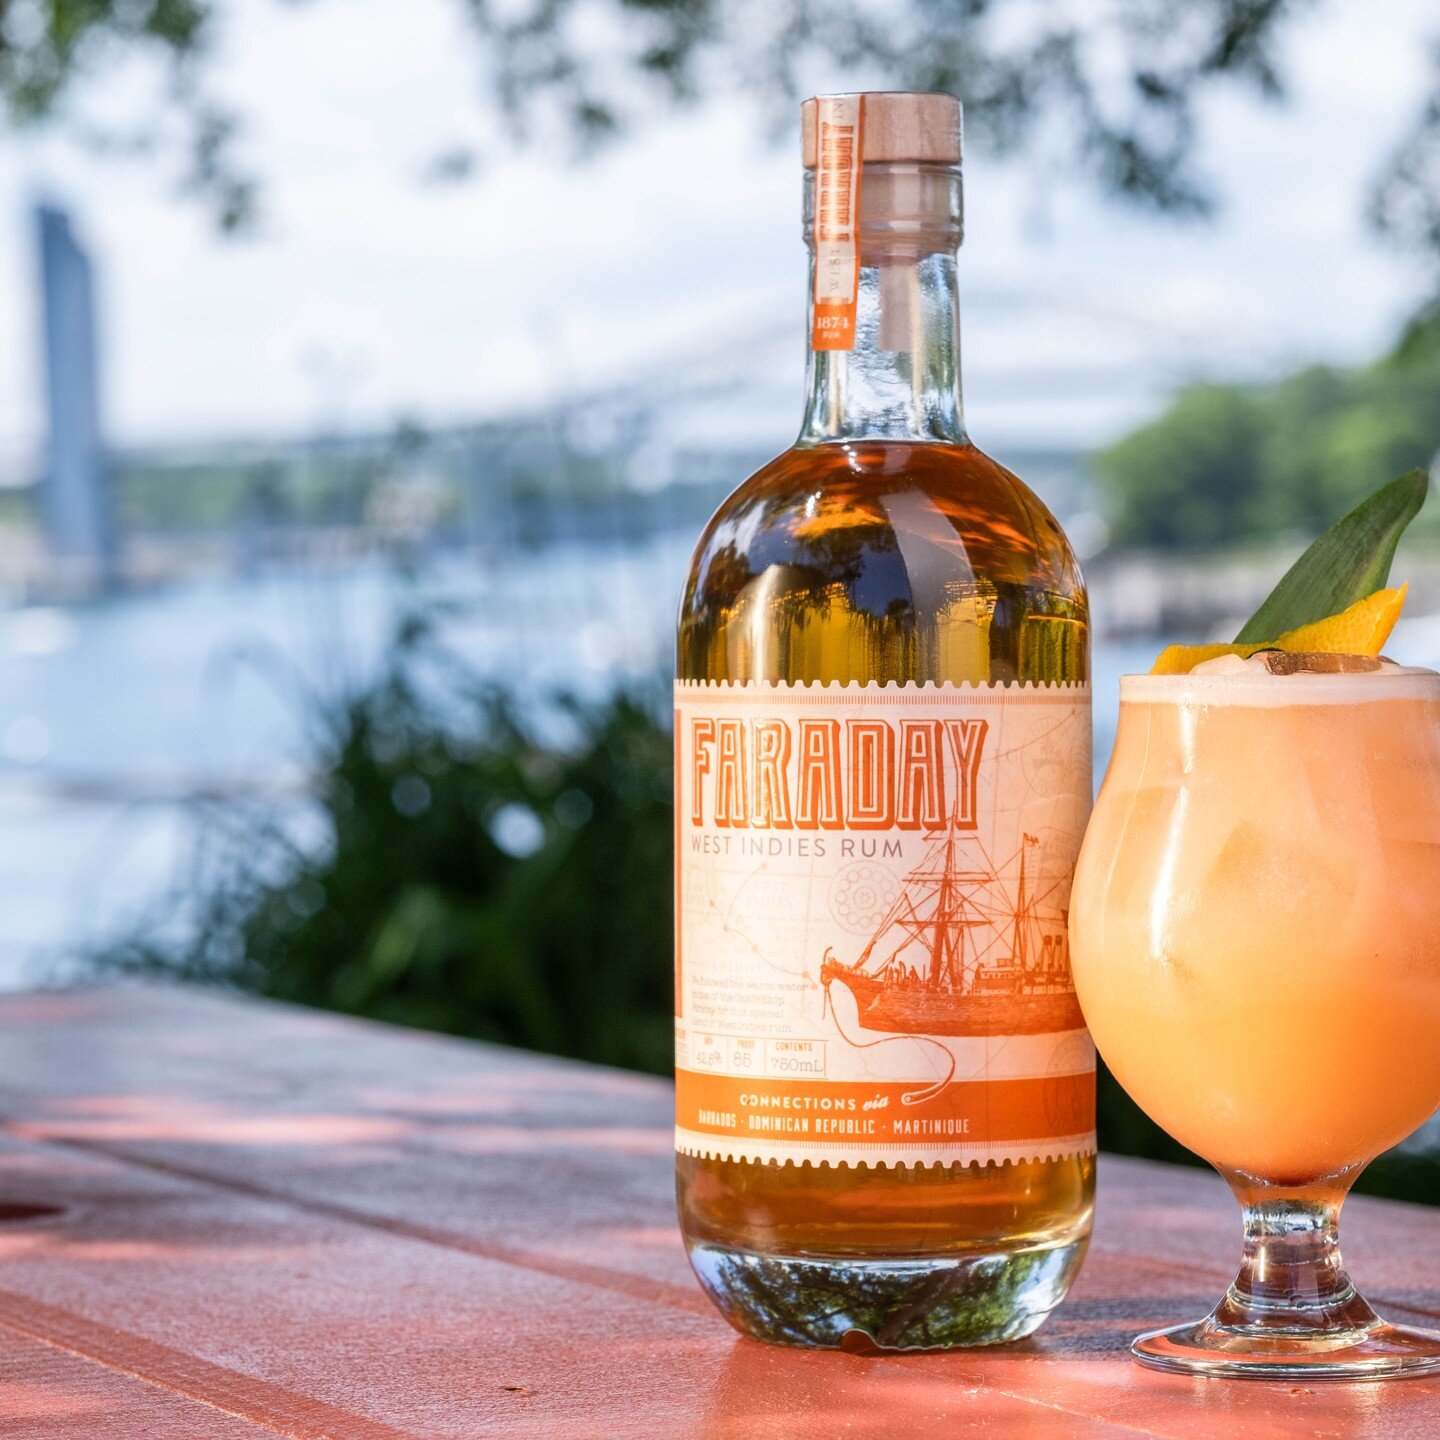 Surf's Up by Kyle Chauncey @orenellsbbq It's summer in the Seacoast people!
#rum #foursquarerum #barbados🇧🇧 #barbadosrum #dominicanrum #rhumagricole #martinique #fwi #kitterymaine #portsmouthnh #boatdrinks